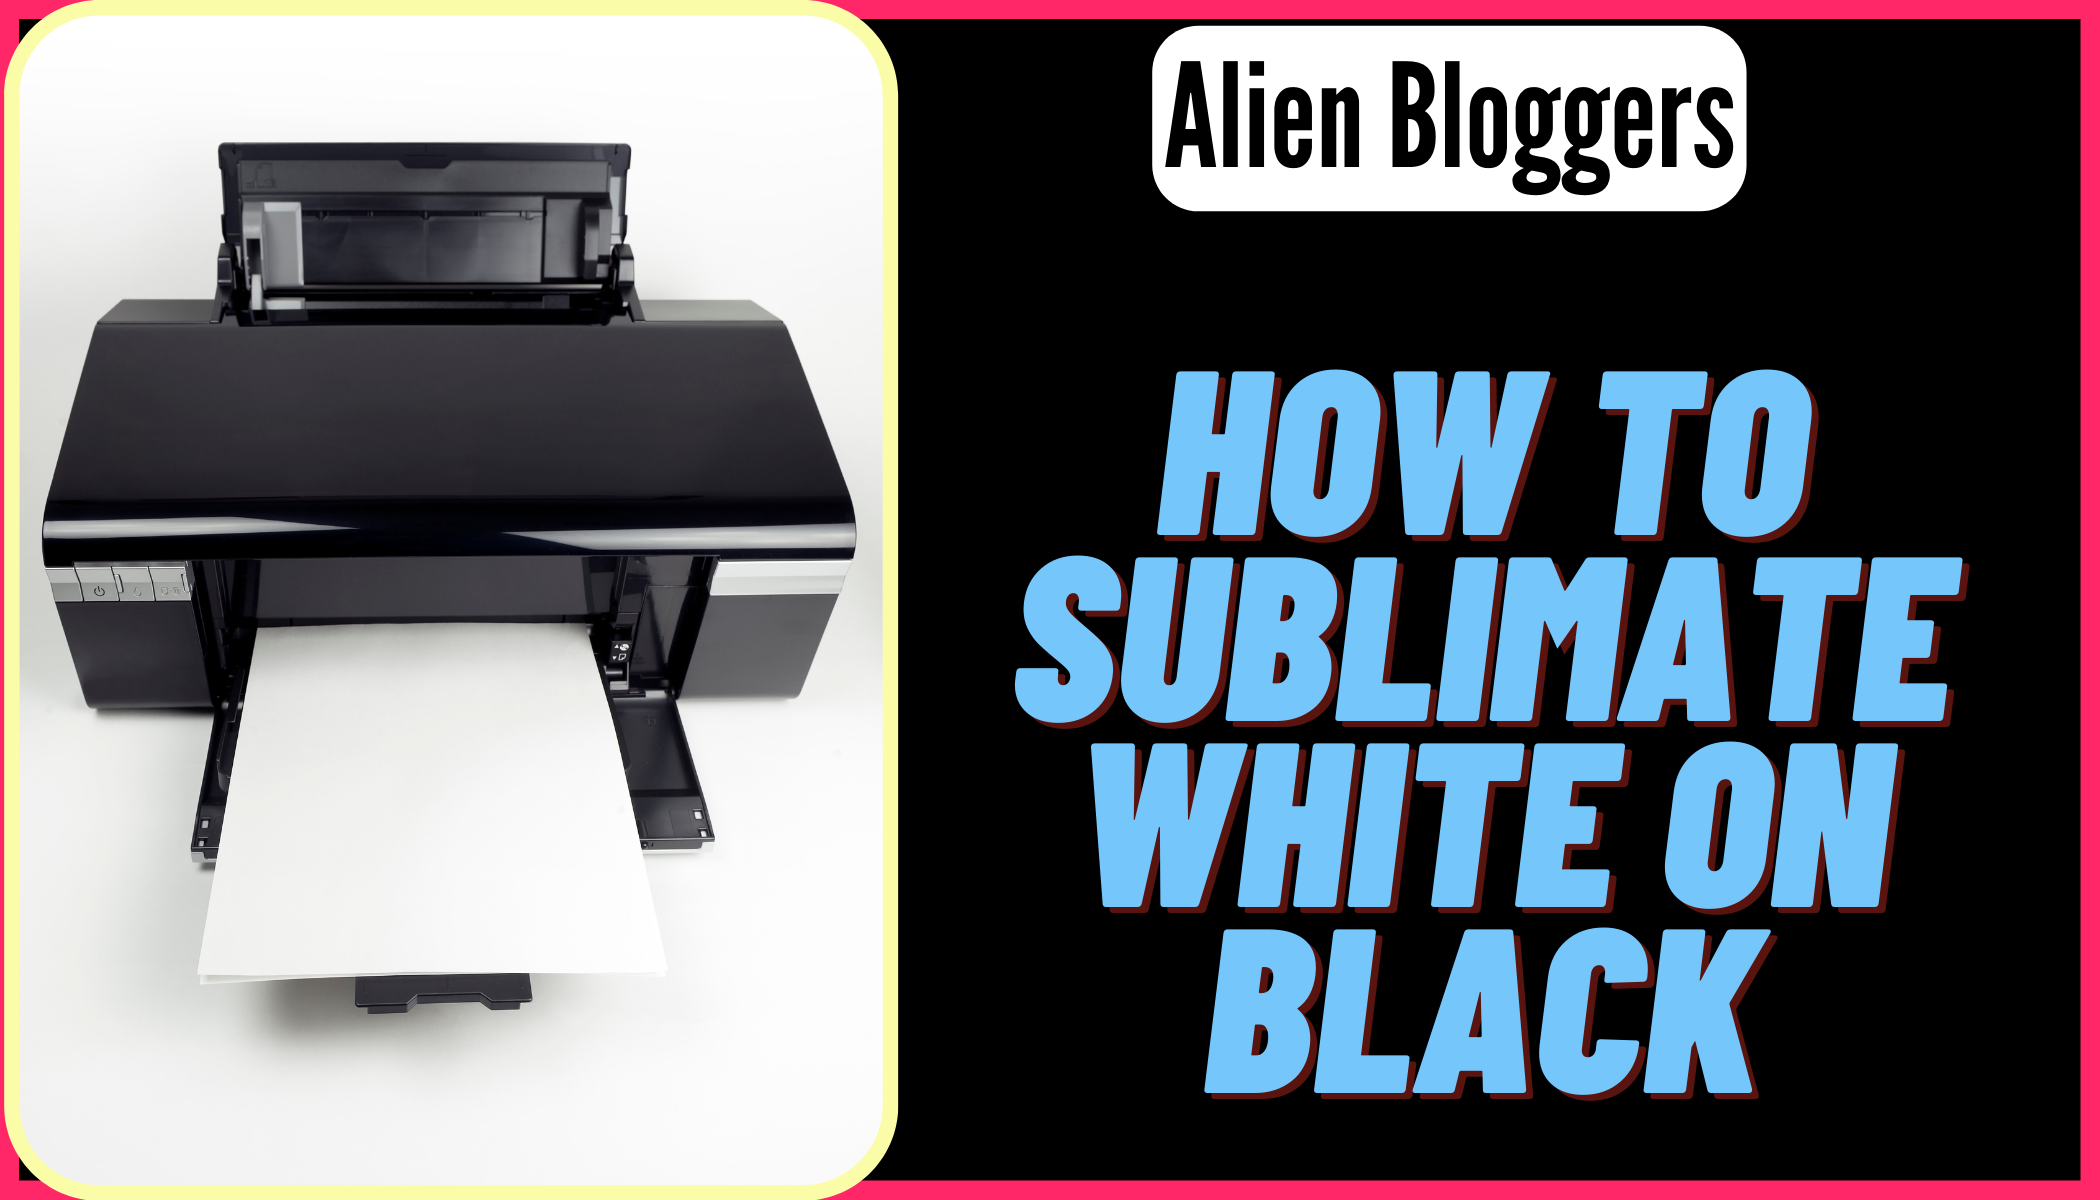 How to Sublimate White on Black